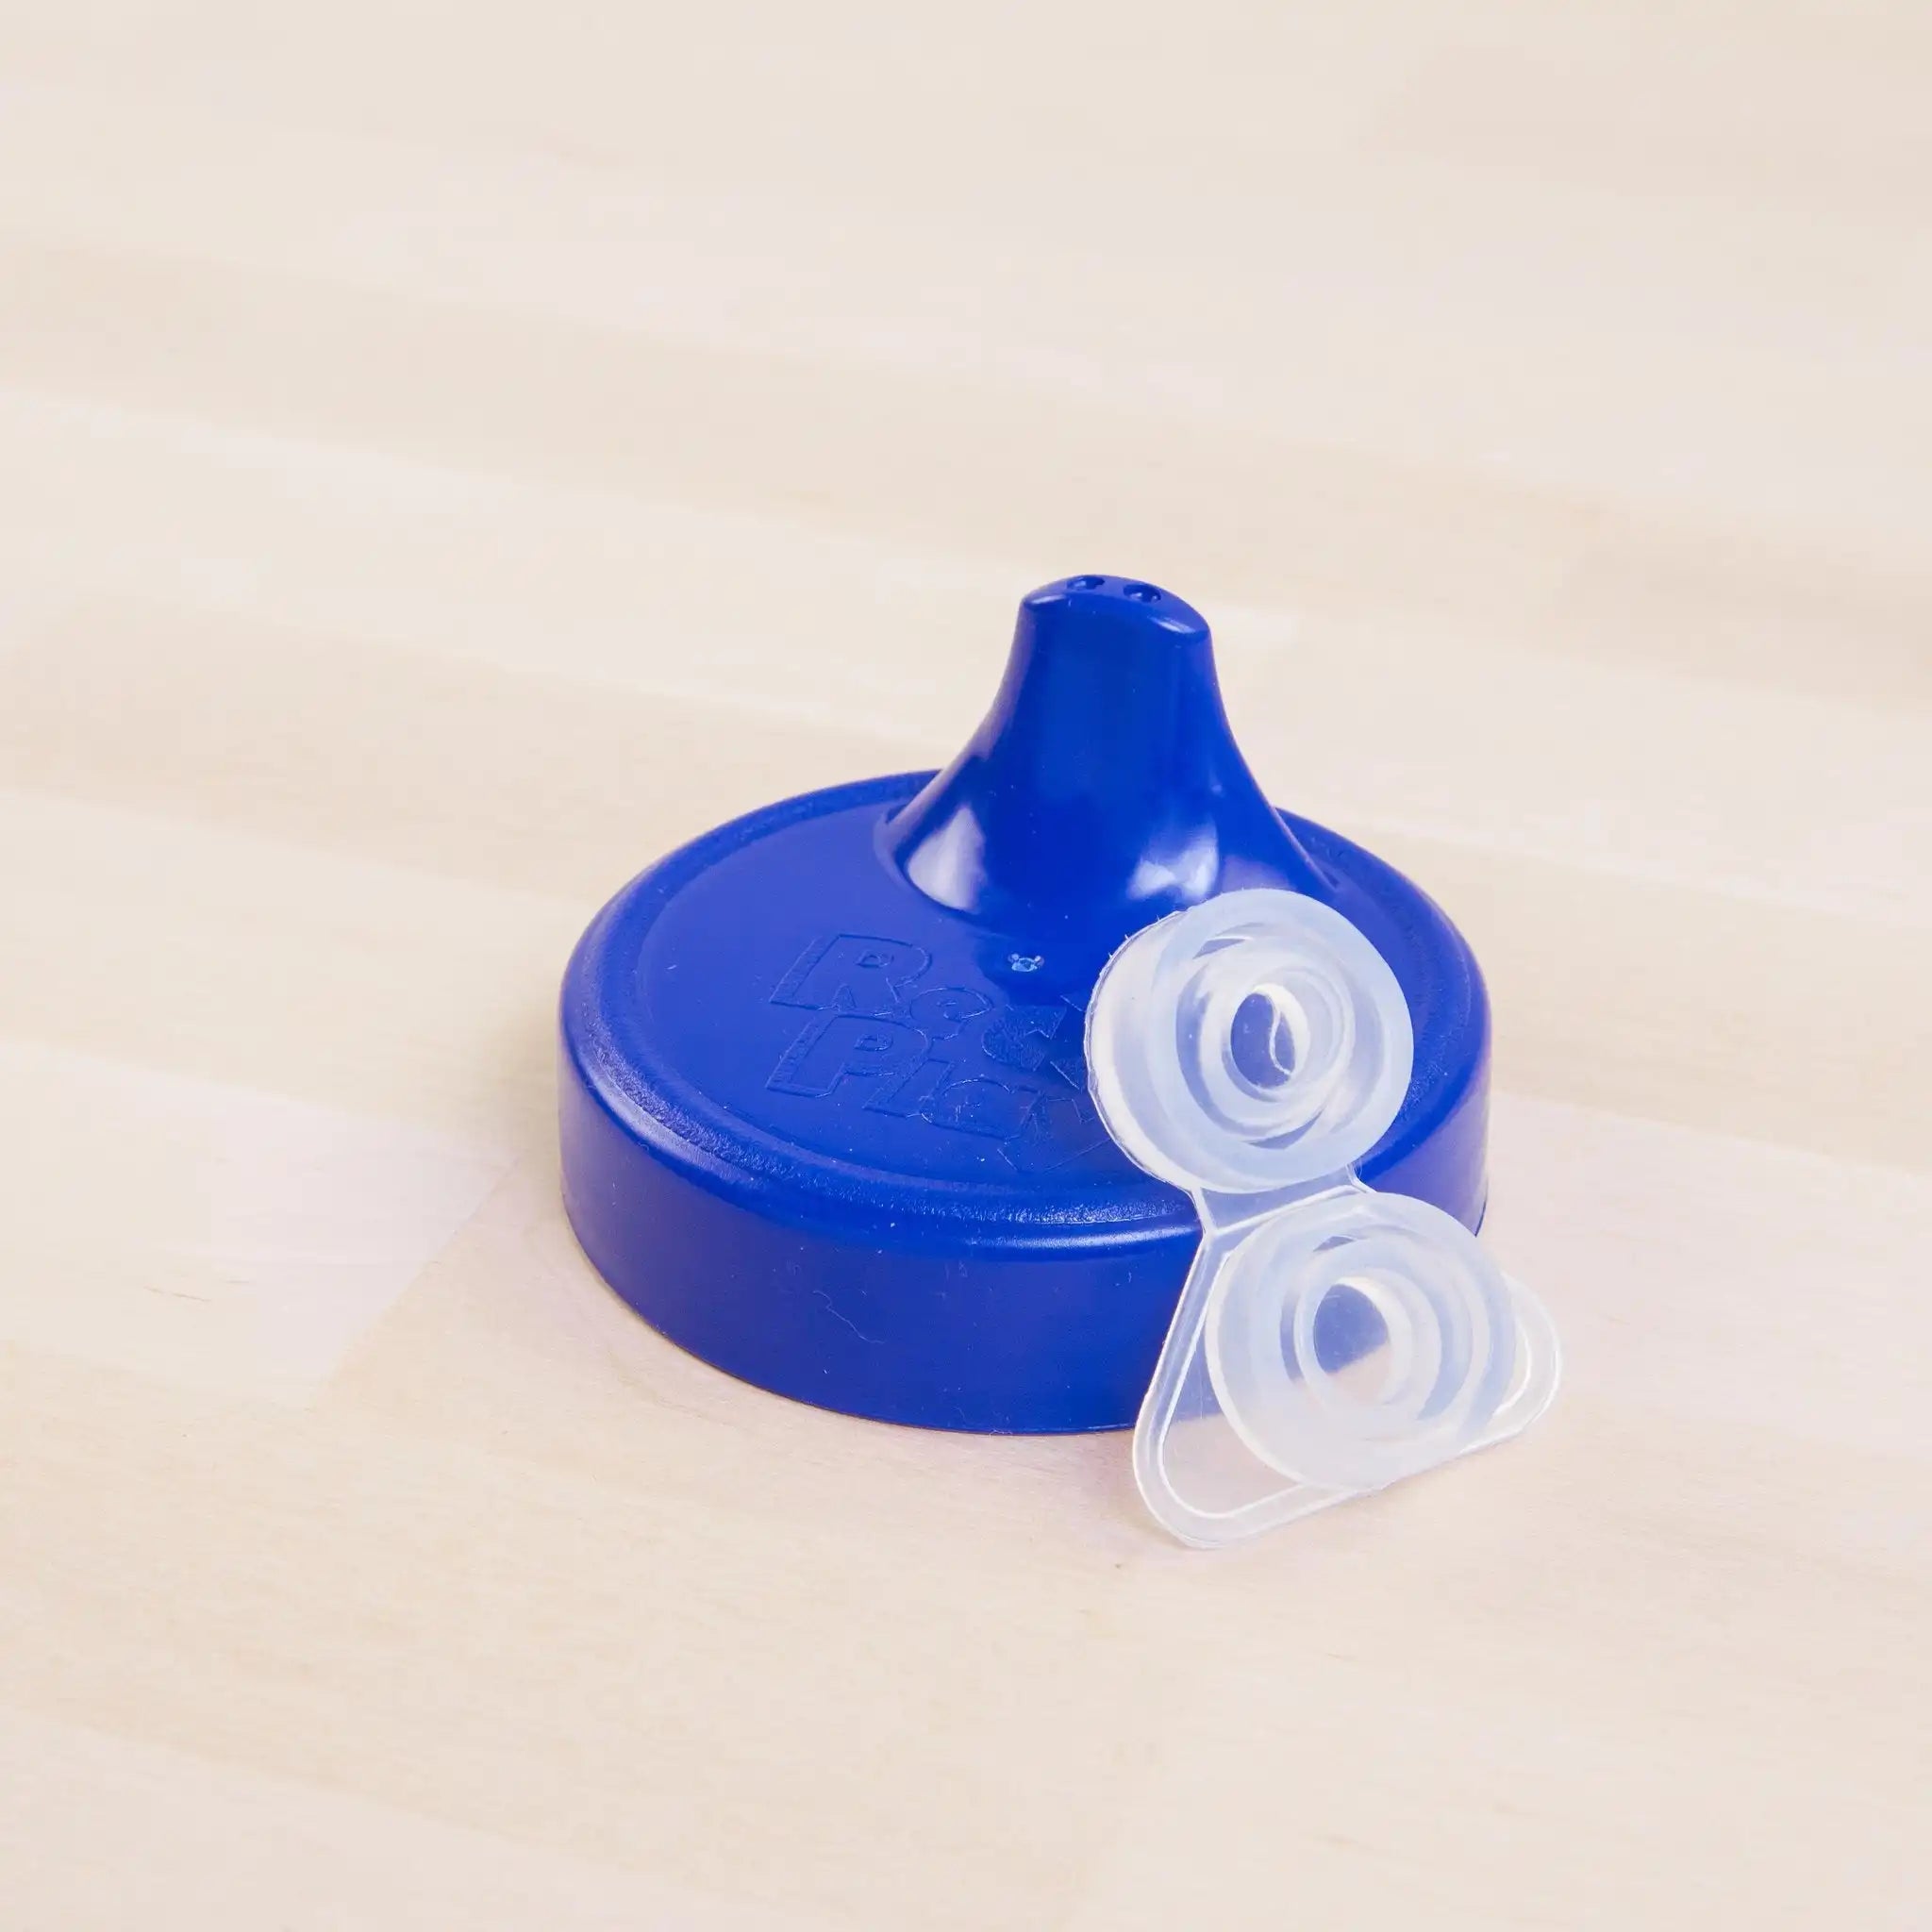 Re-Play - Packaged Spill Proof Cups (True Blue)